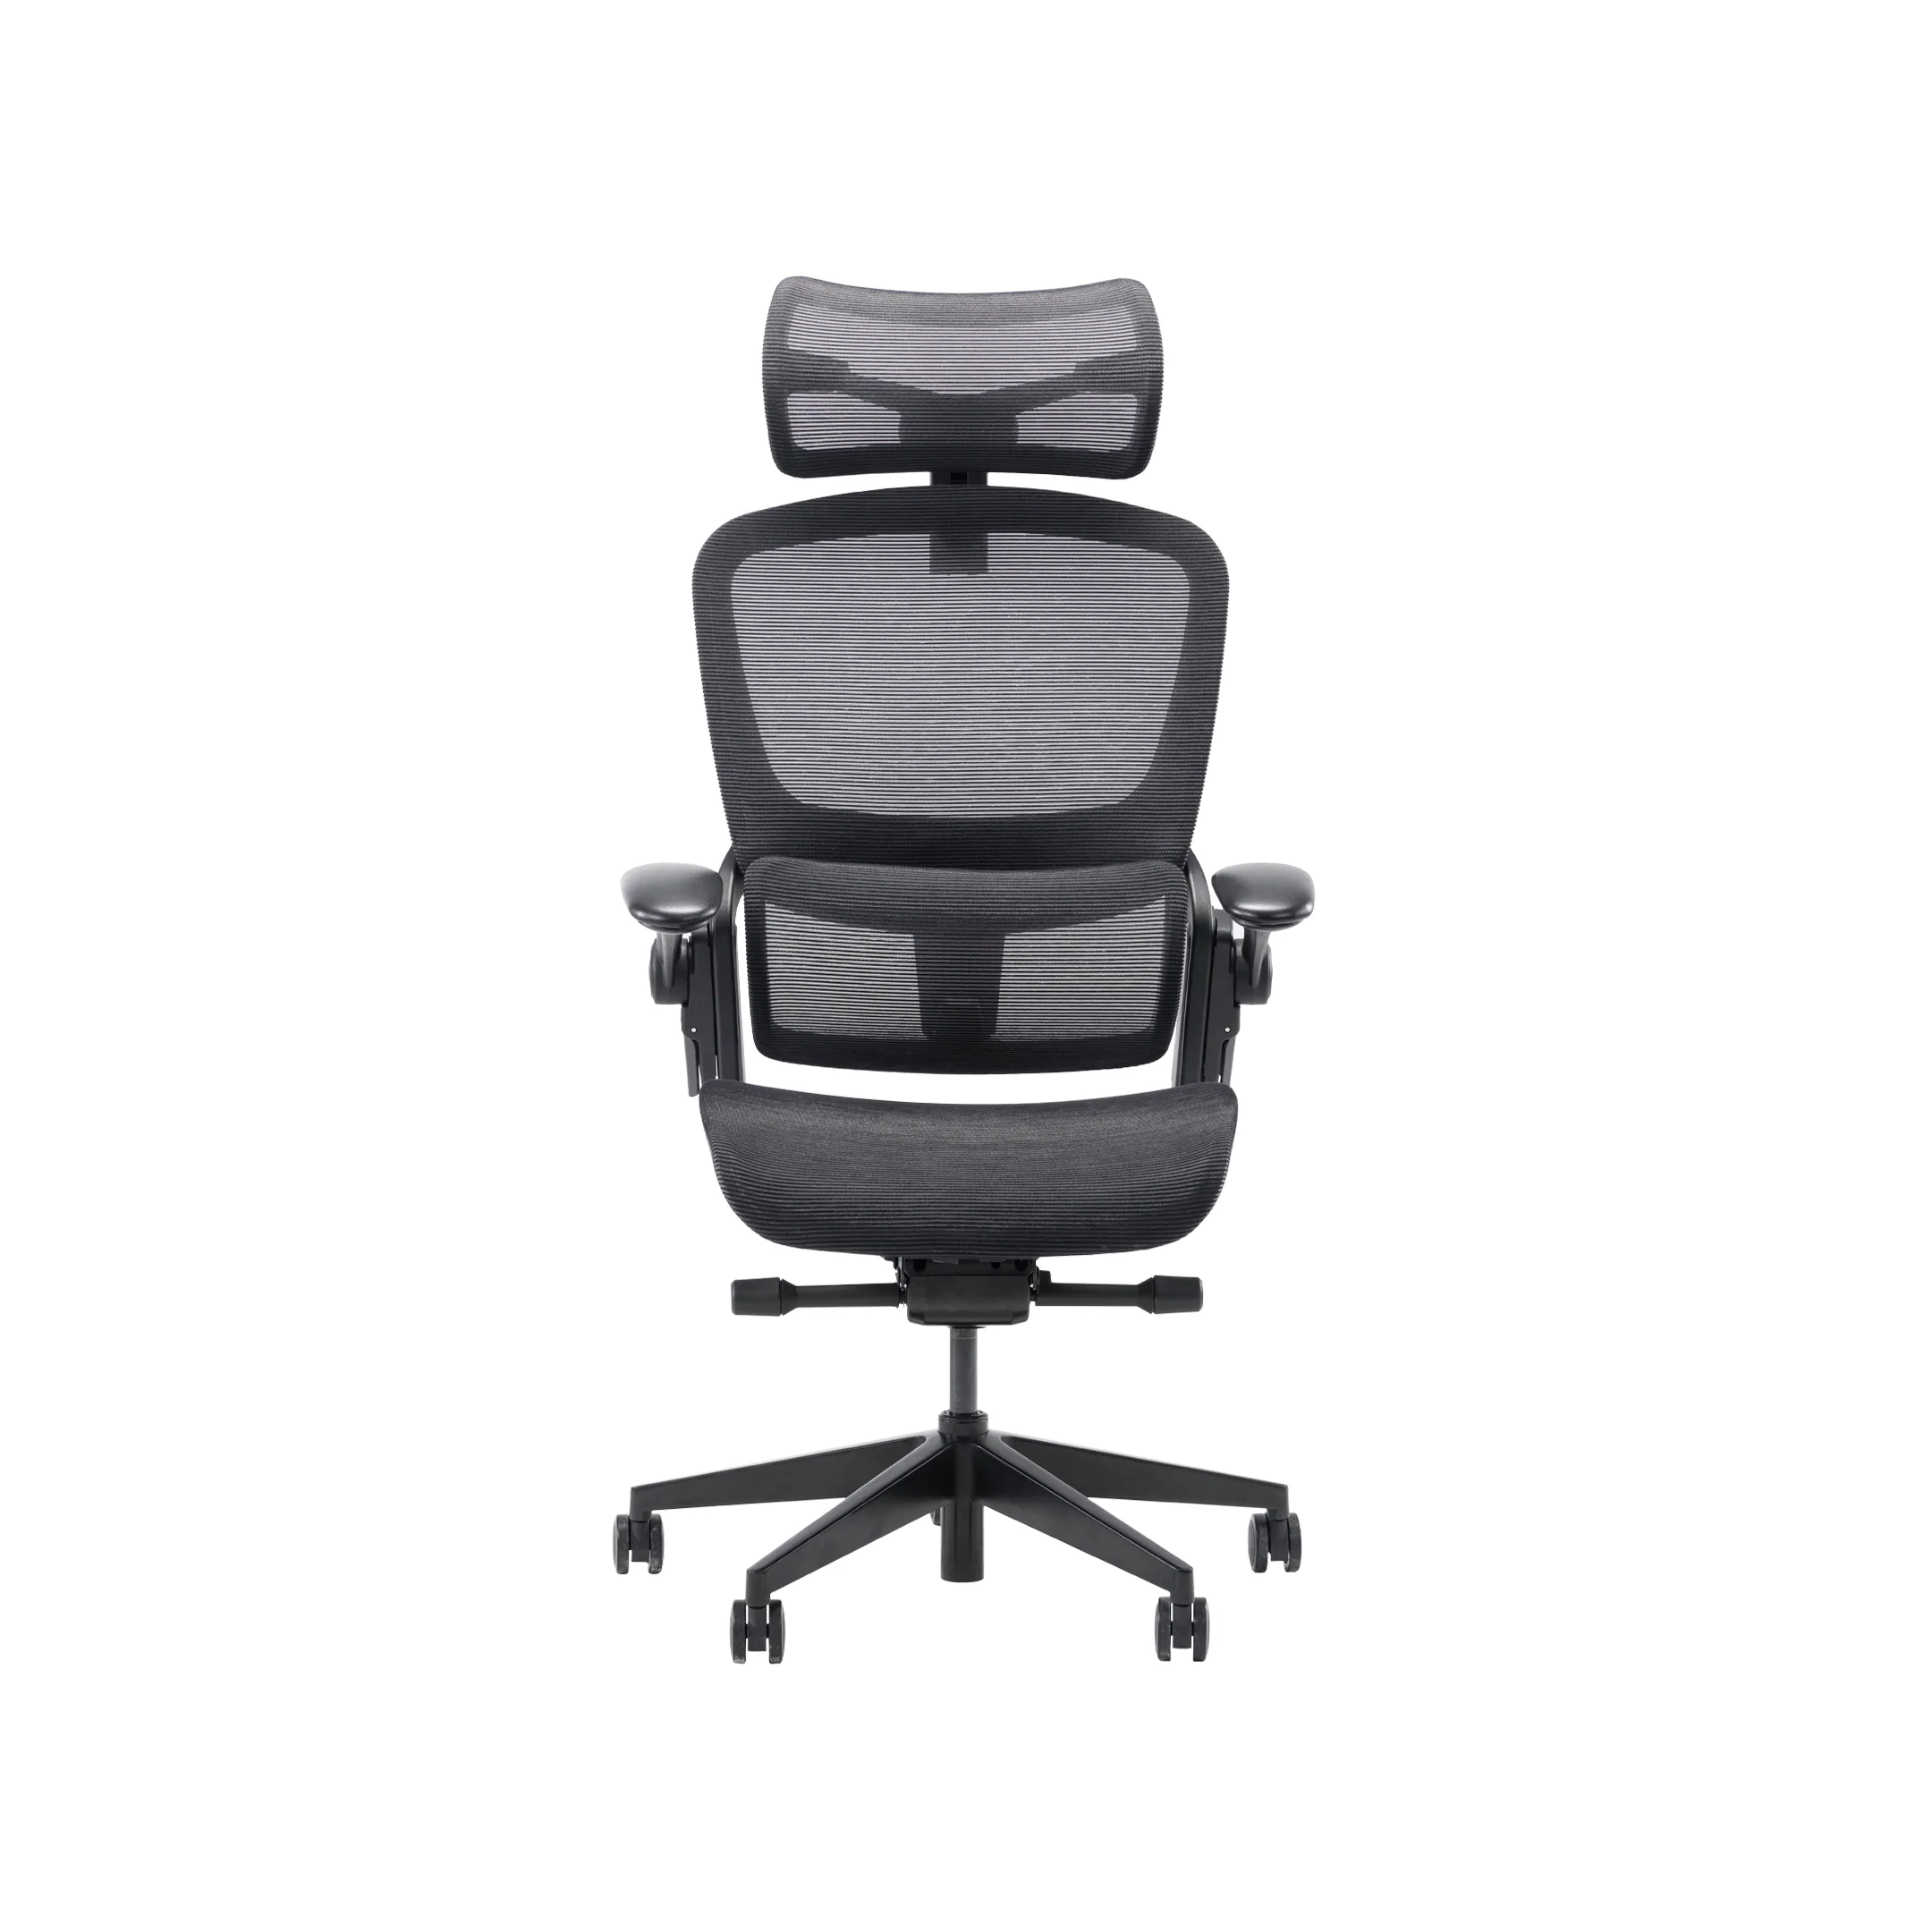 ghe-cong-thai-hoc-epione-easychair-2-all-black-front